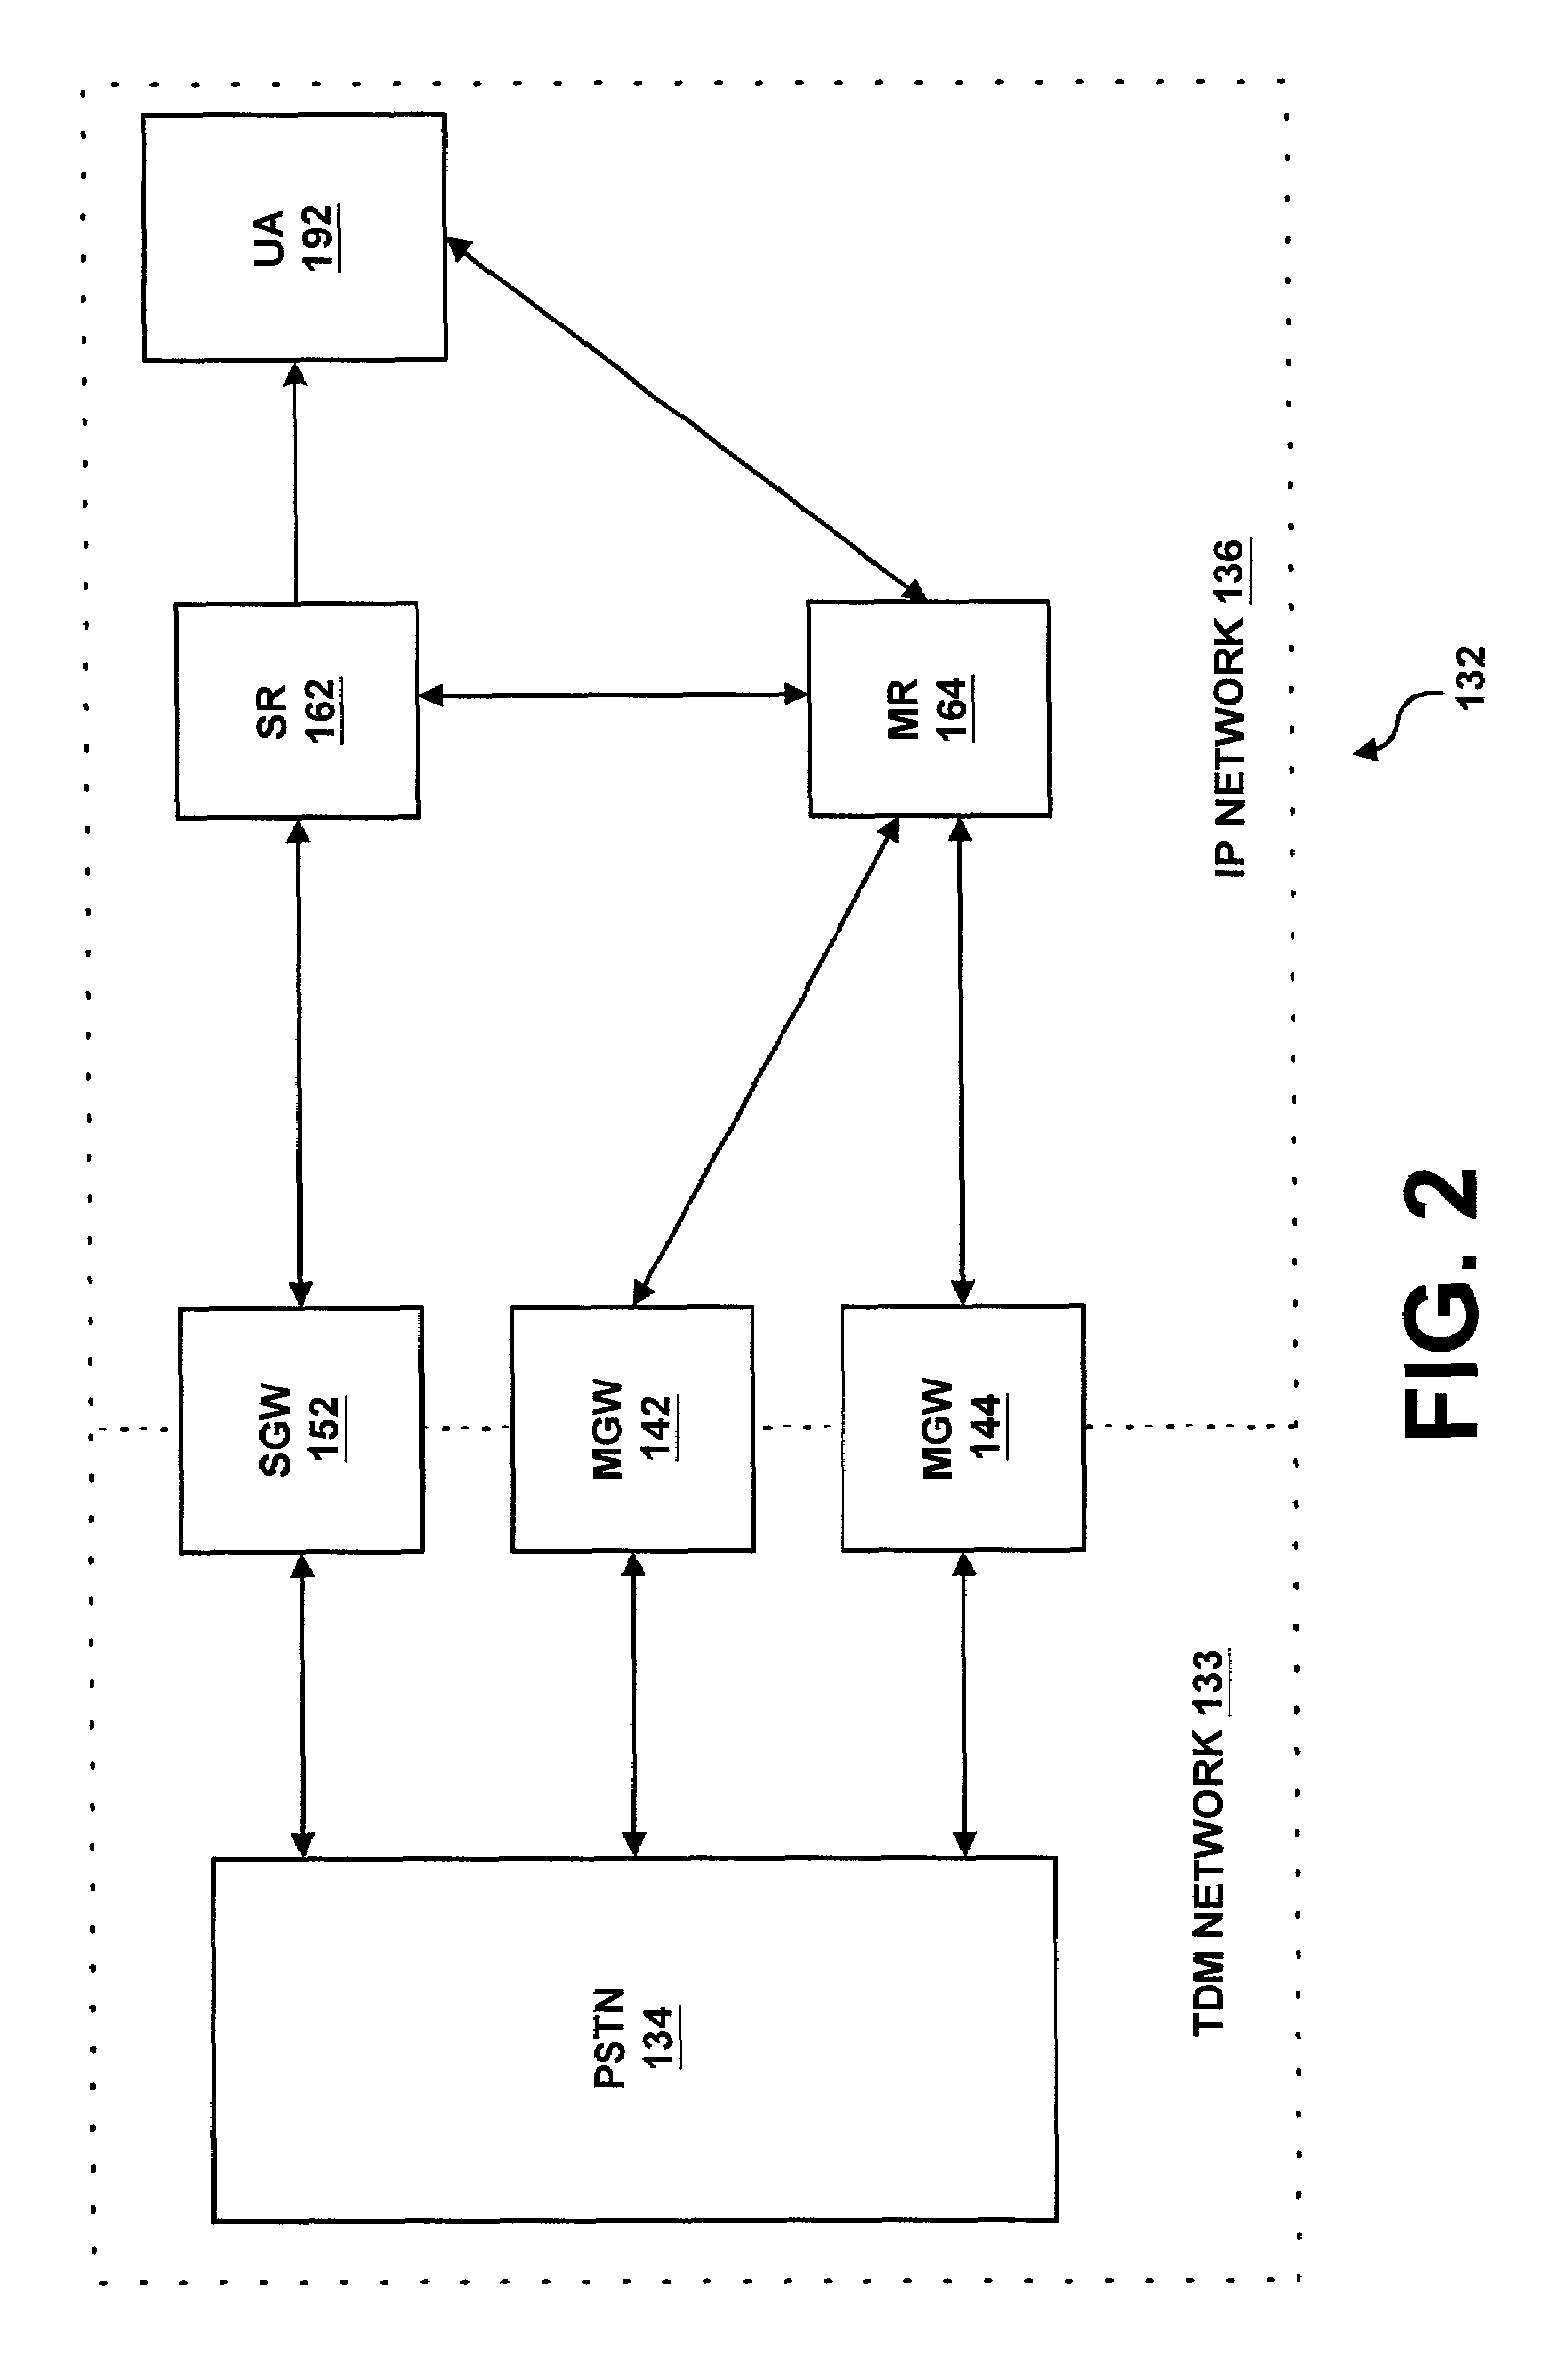 System and method for improving communication between a switched network and a packet network